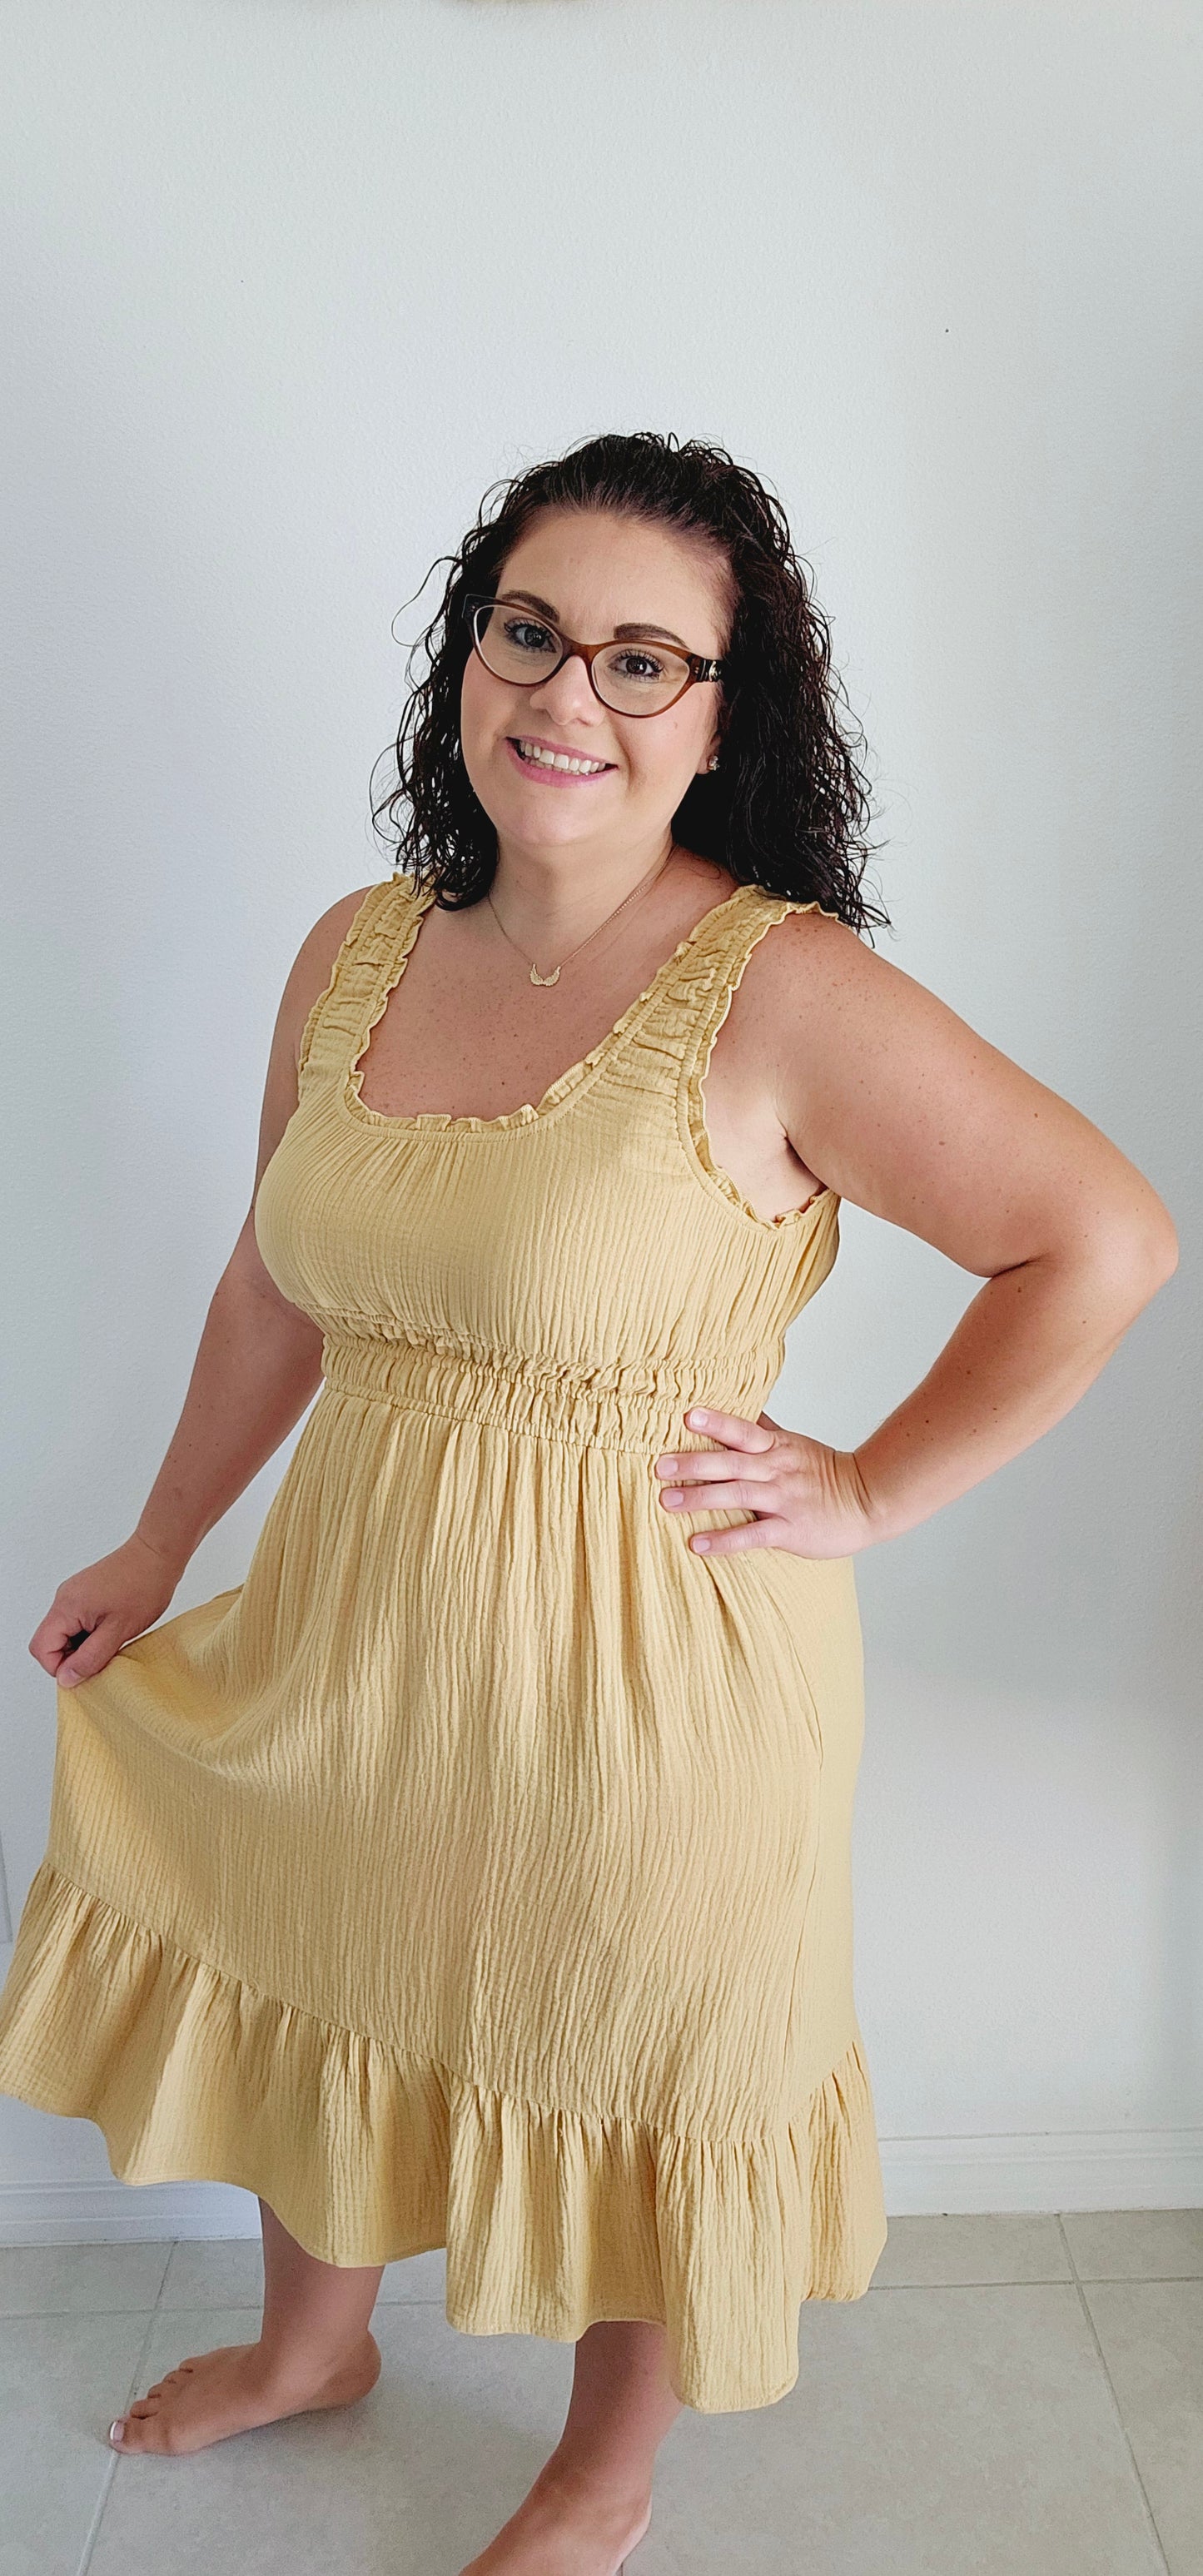 Get ready for a summer sensation with the Delilah tiered gauze midi dress! Made with lightweight cotton gauze, this dress features shirring, ruffles, and elastic for a perfect fit. Plus, pockets for convenience. It's the perfect dress for a fun and playful look. Sizes small through large.